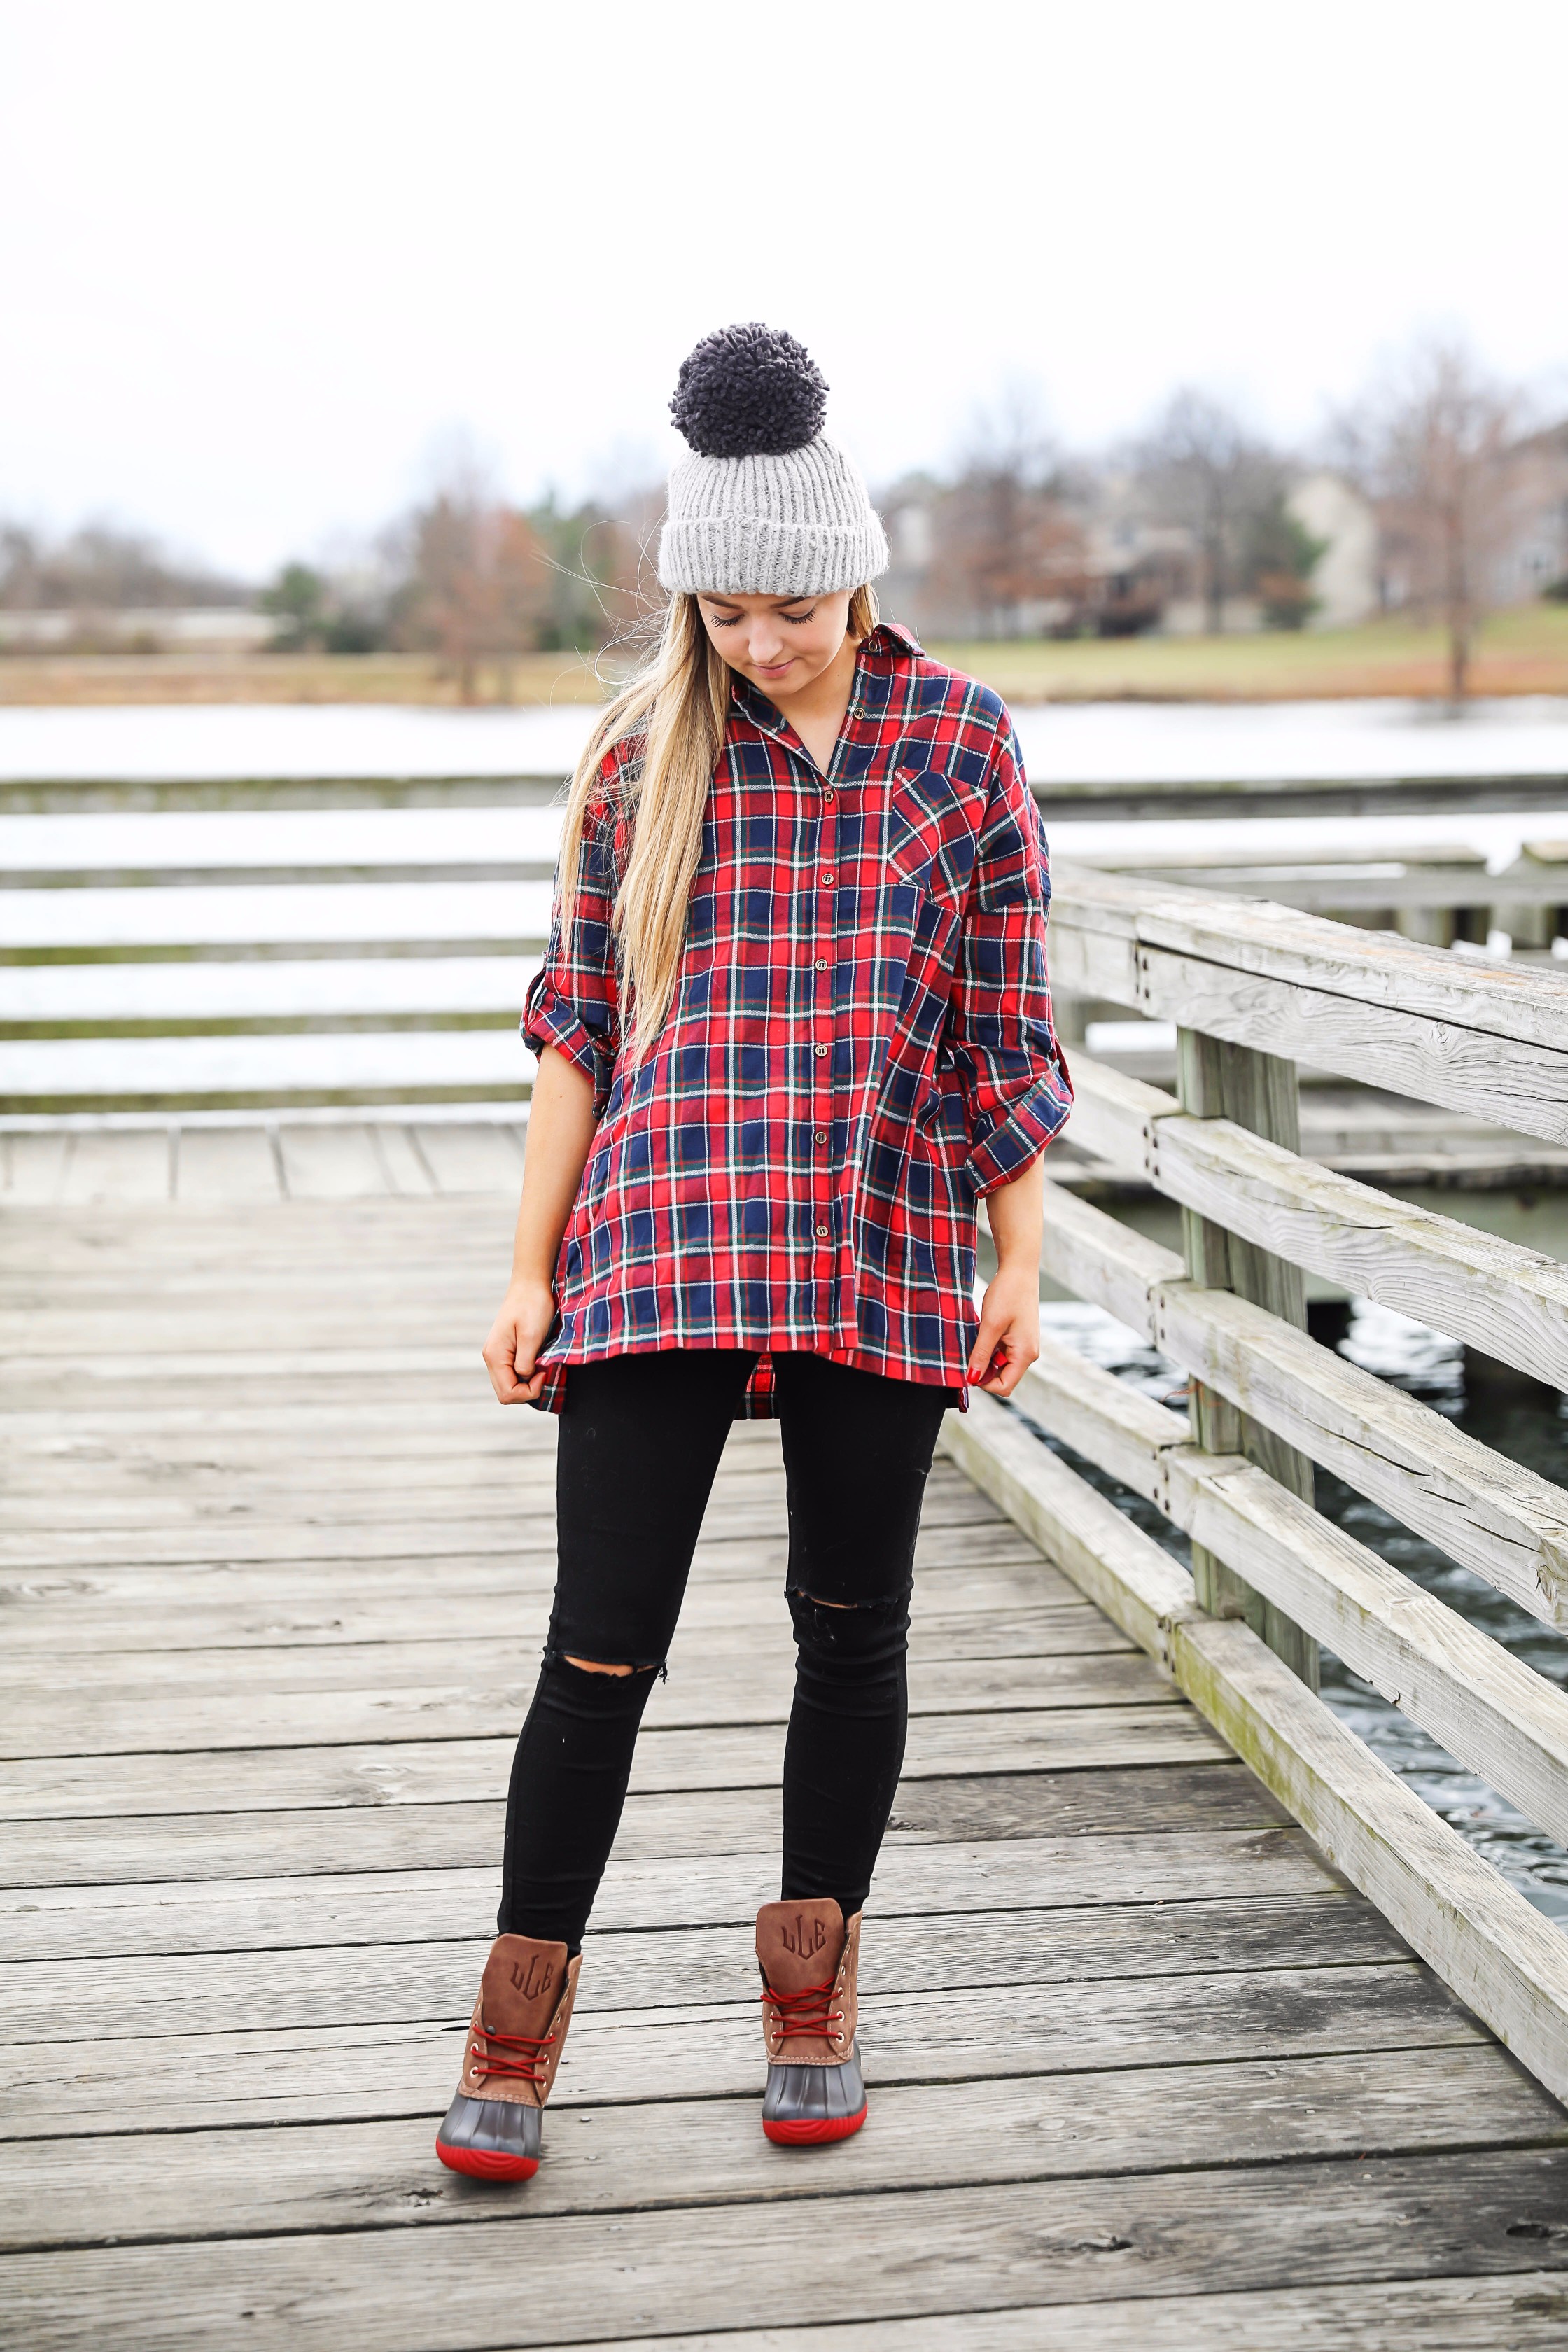 Cute flannel outfit with beanie and monogramed duck boots! Cute fall and winter camping outfit idea! Details on the fashion blog daily dose of charm by lauren lindmark